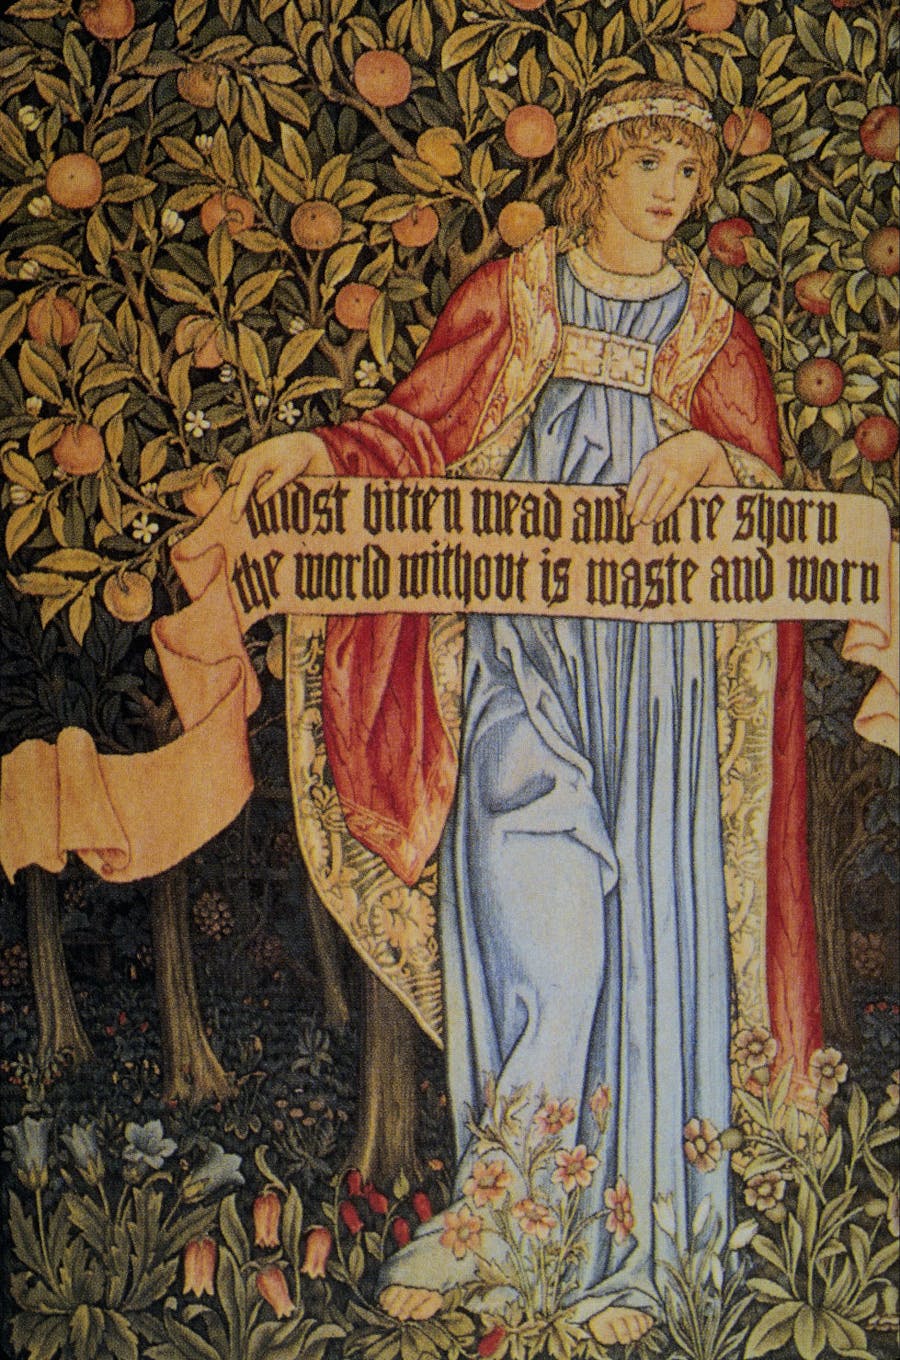 ‘Summer’ detail from ‘The Orchard’ tapestry designed by William Morris and woven by Morris & Co. in 1890. Photo public domain